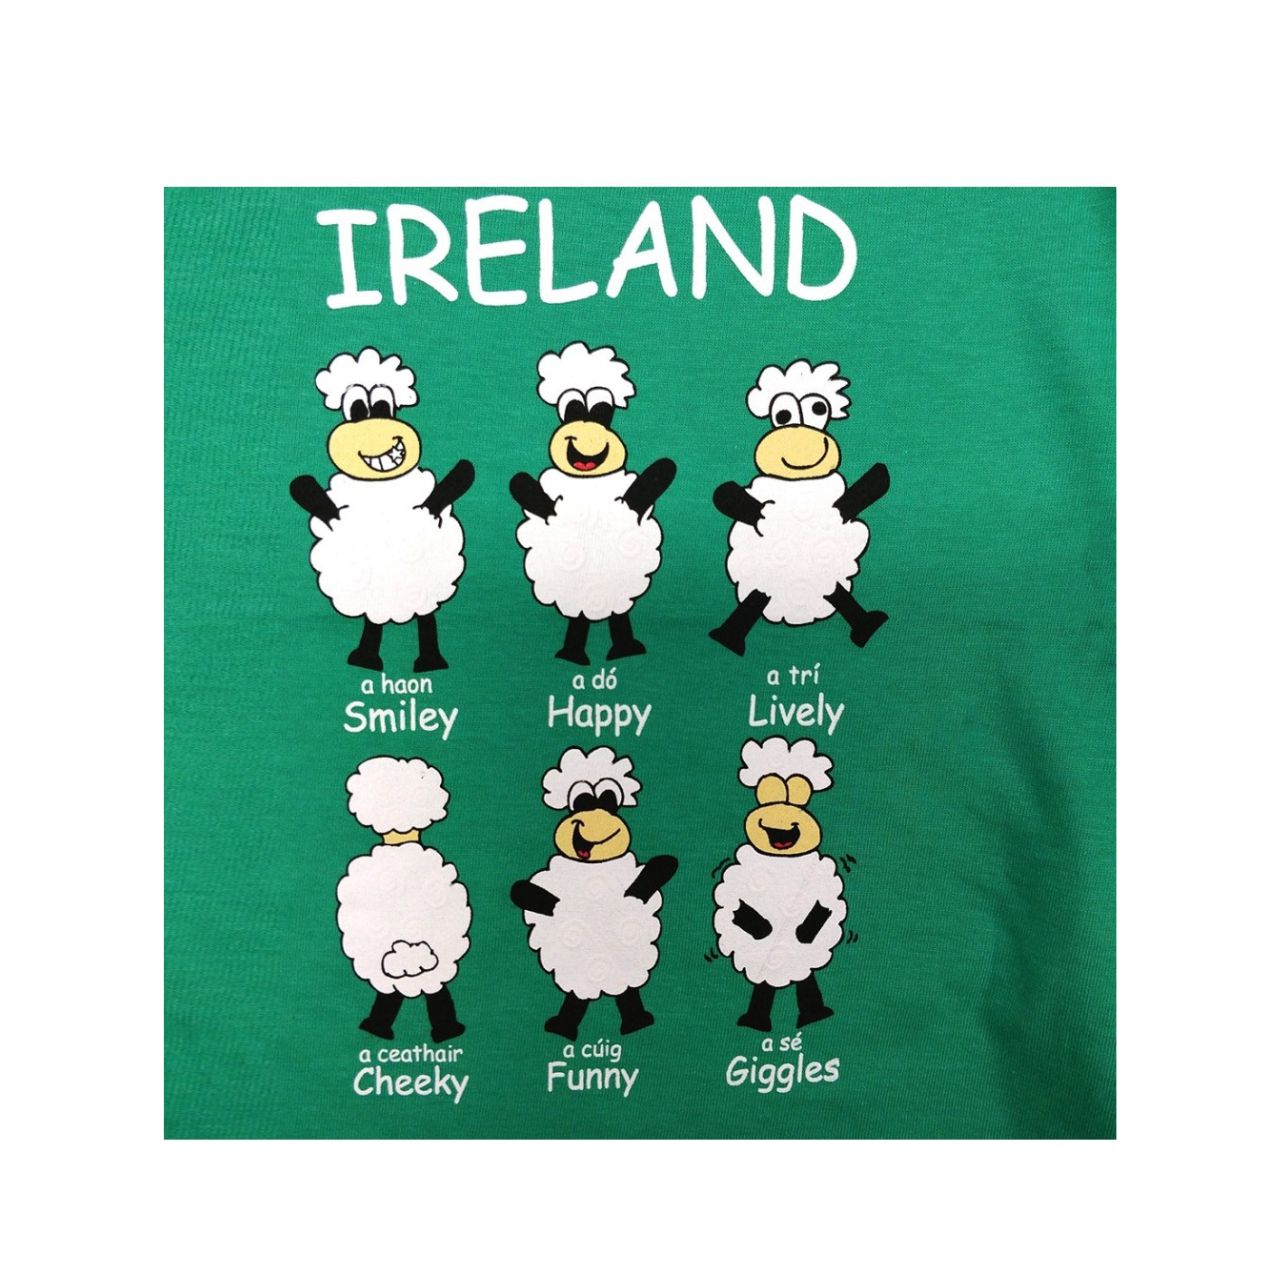 This emerald green cotton kids T-shirt is a part of the Traditional Craft Official Collection. It is a relaxed fit and features various different printed "Happy Sheep".